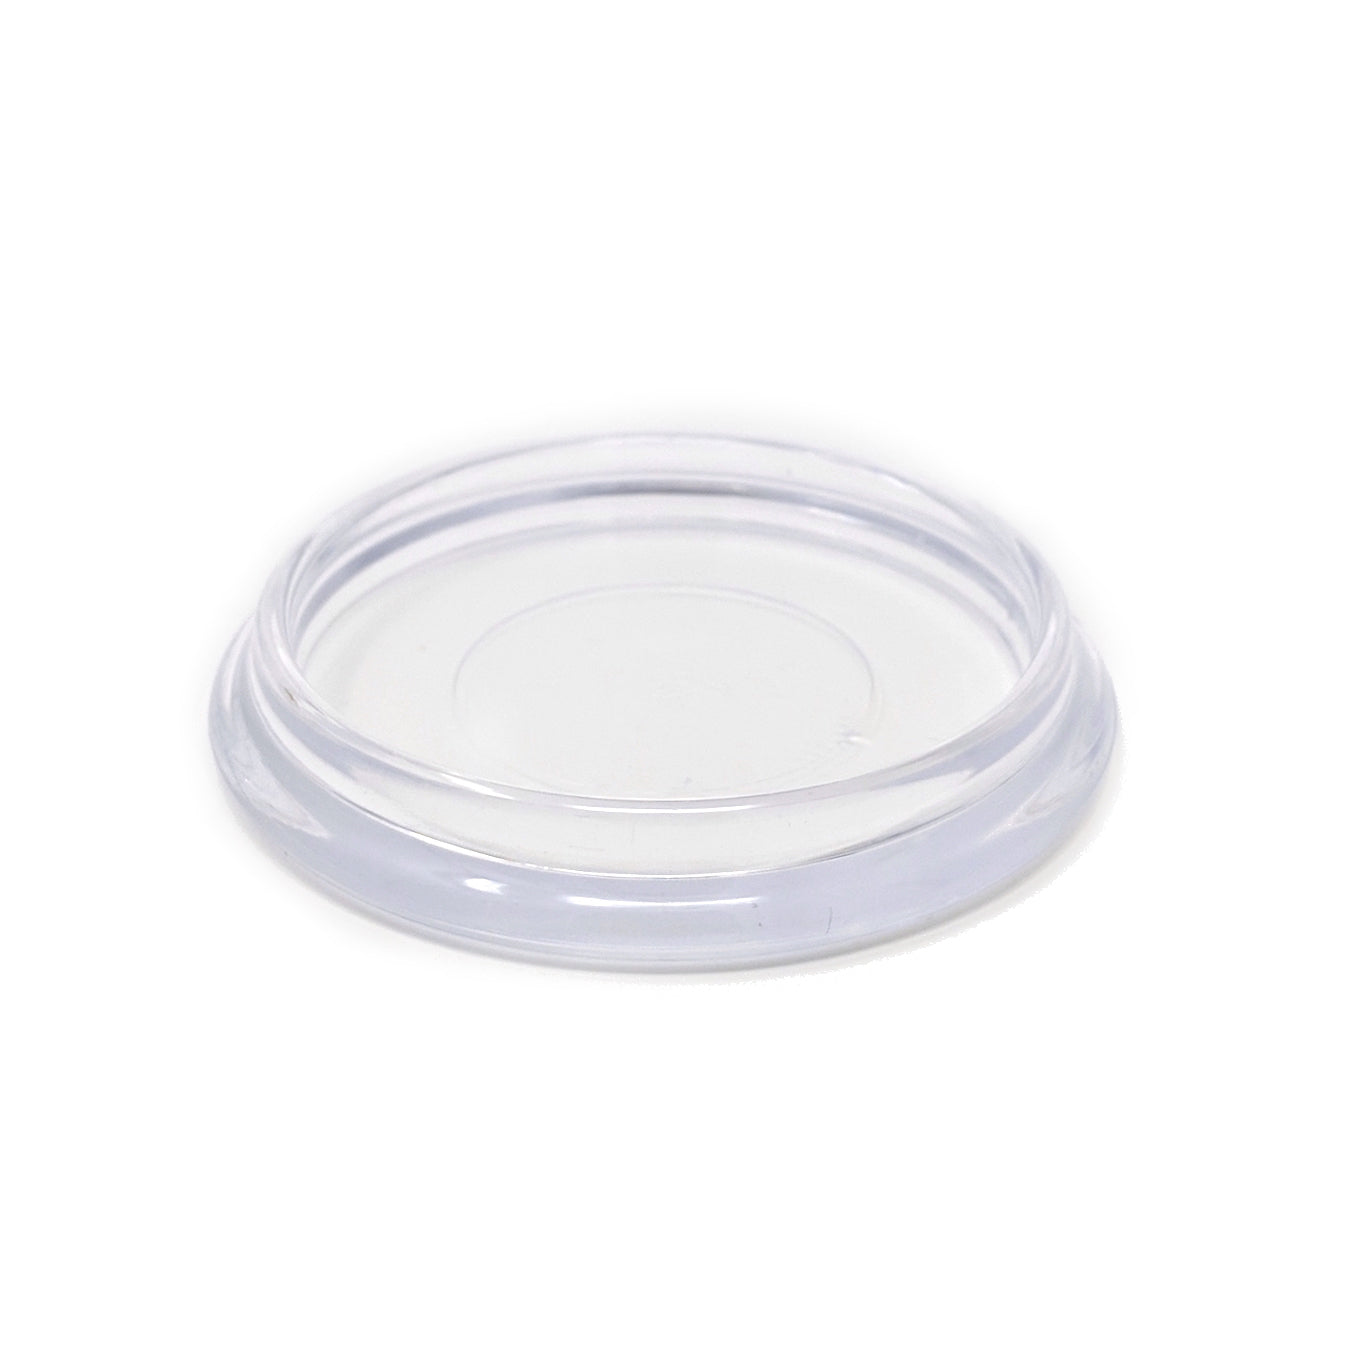 60mm Clear Round Furniture Leg Cups Floor Carpet Protector - Made in Germany - Keay Vital Parts